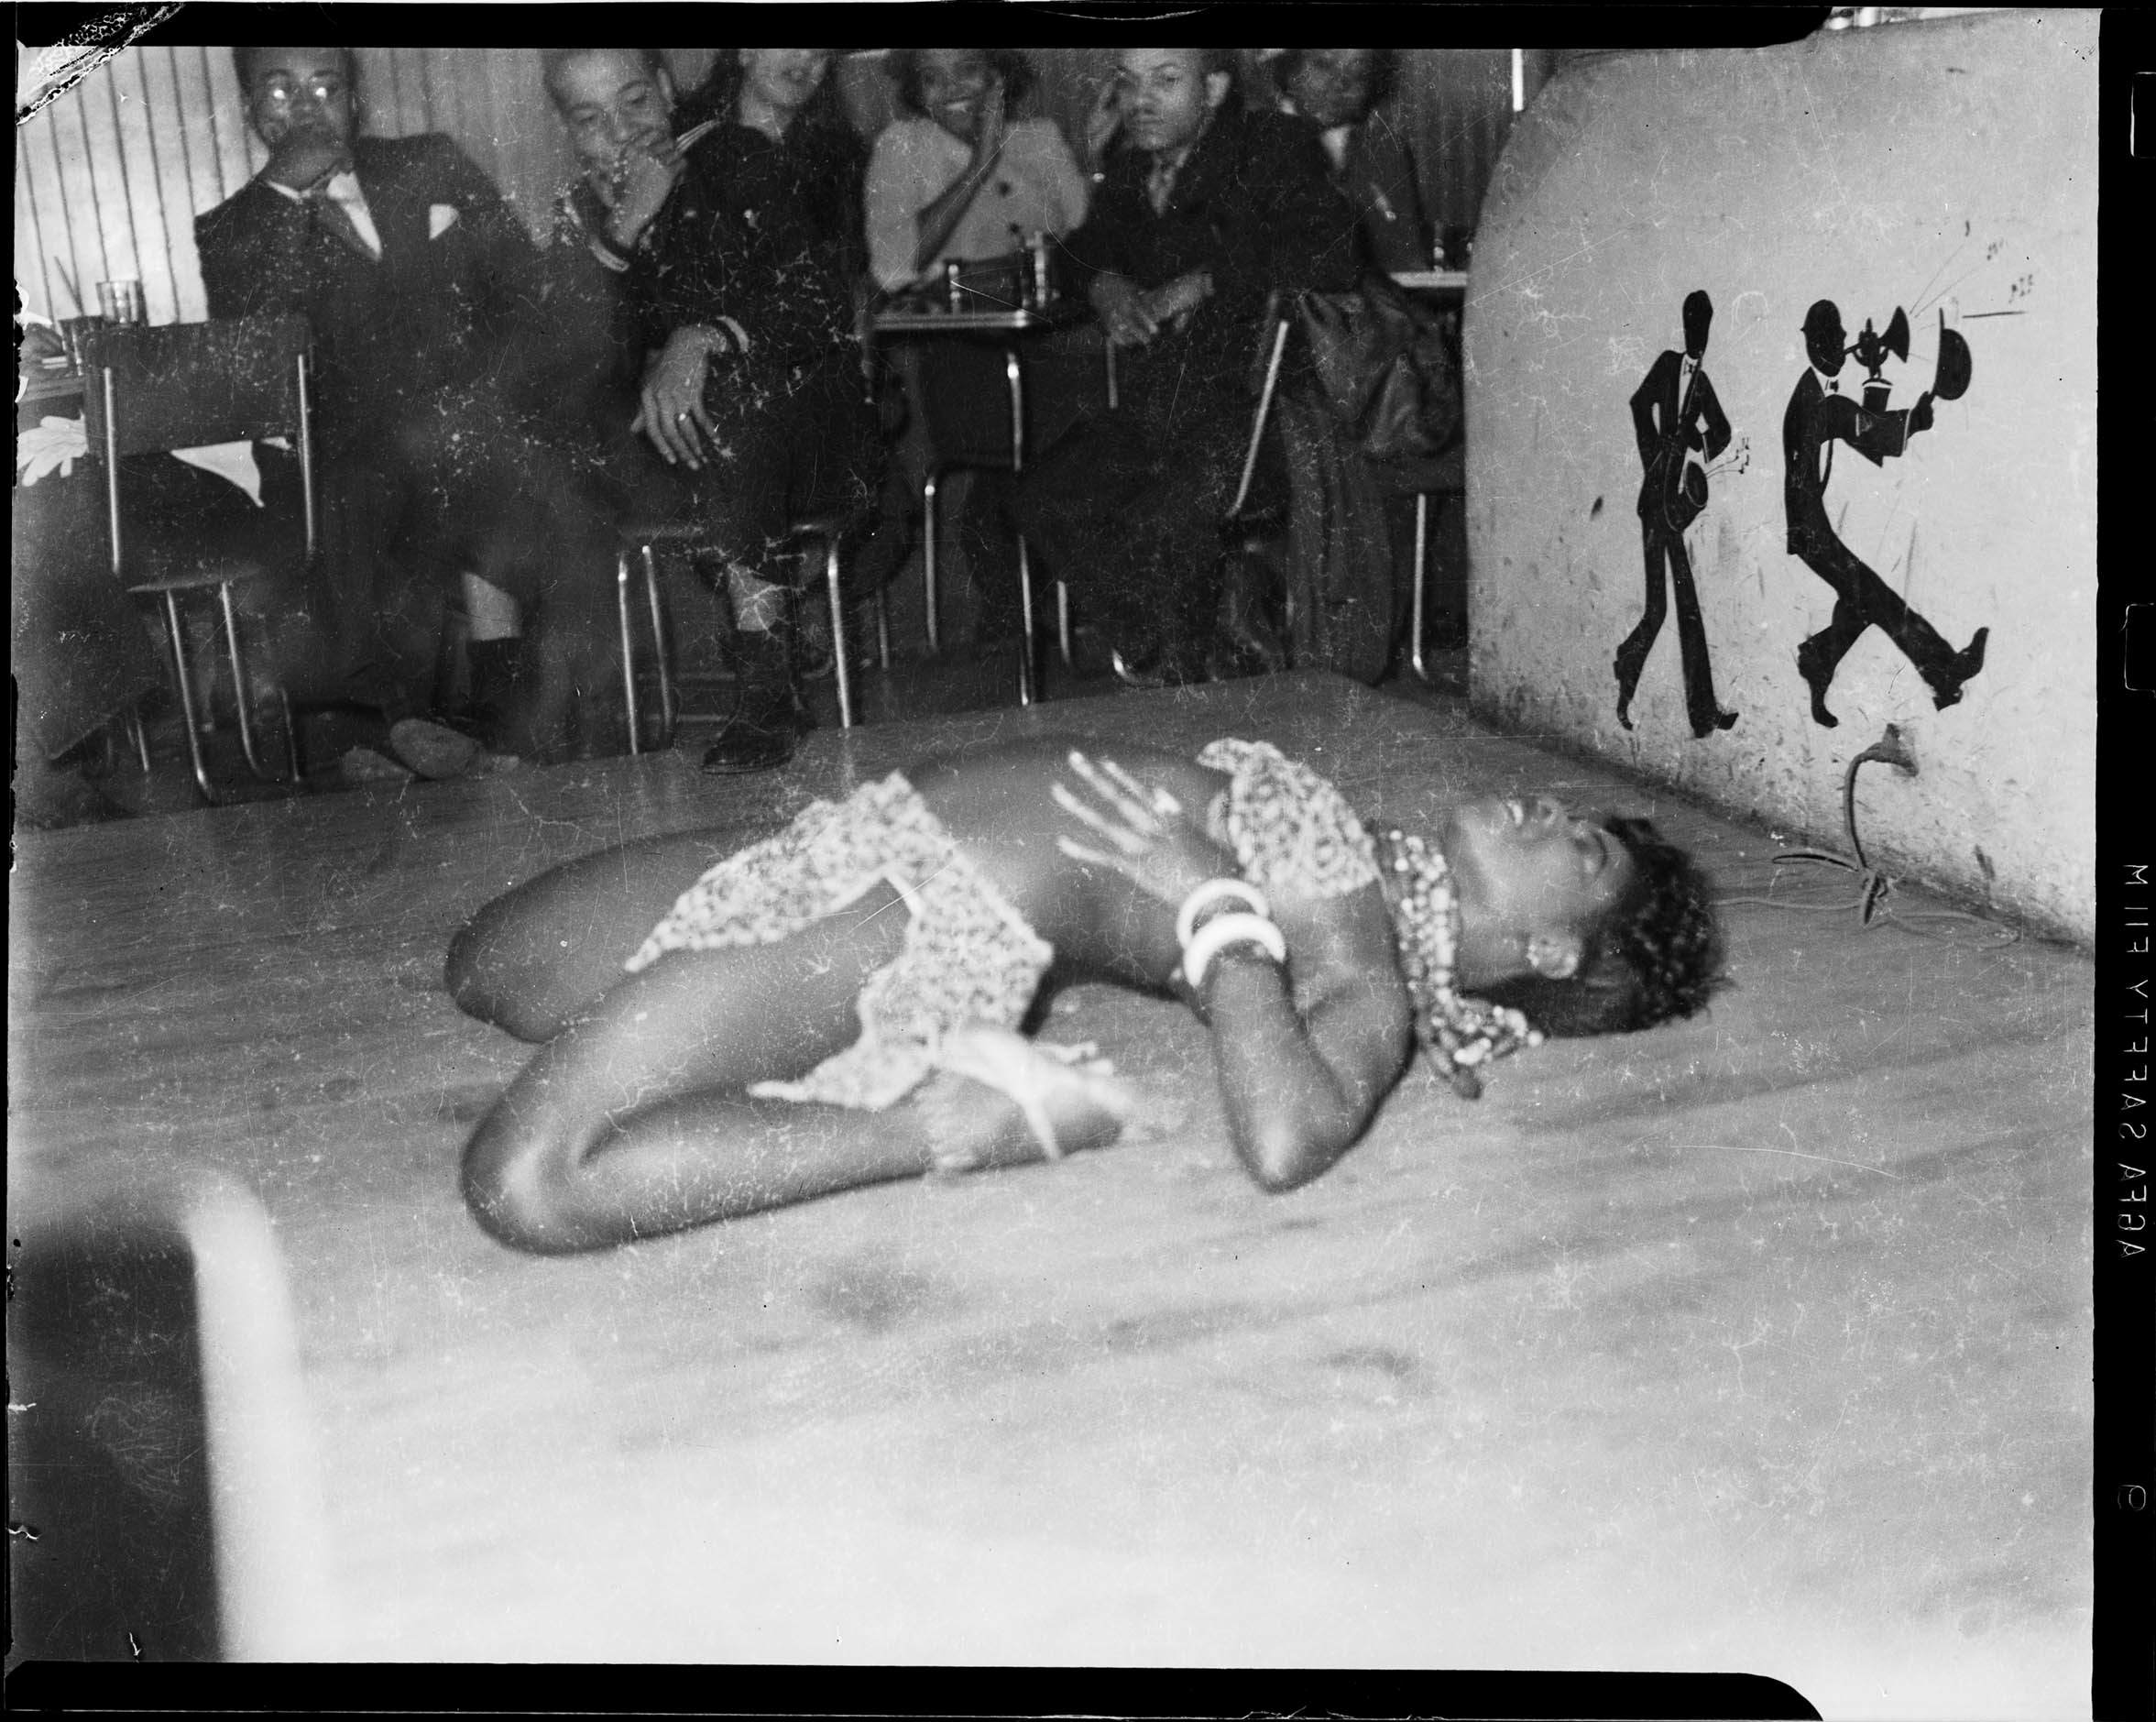 Female dancer in two piece costume bending over backwards on stage with jazz musician caricatures decoration